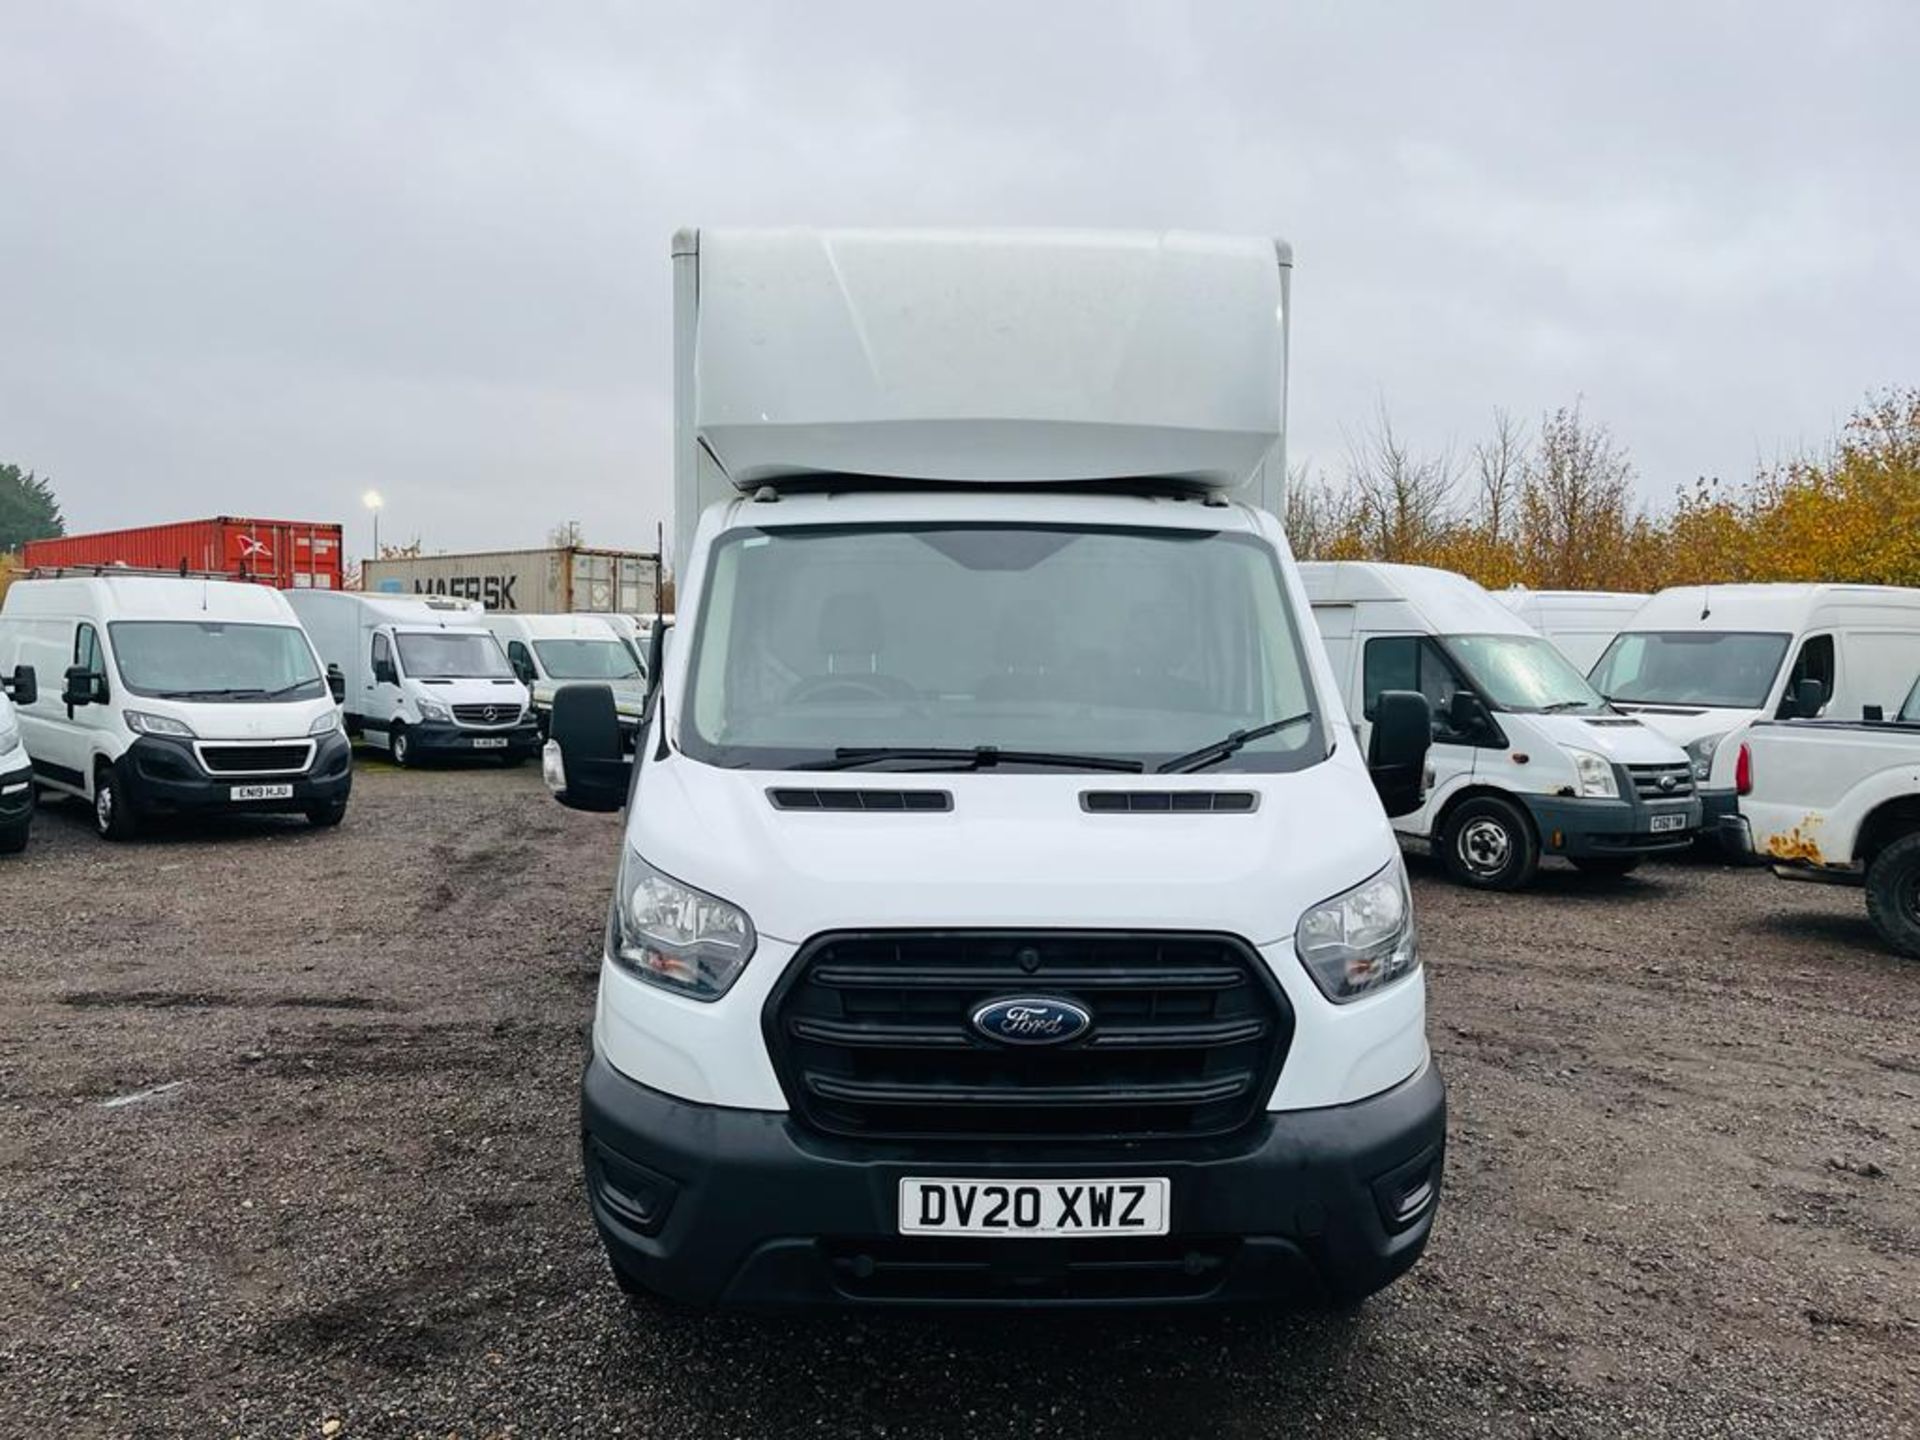 Ford Transit 2.0 EcoBlue 130 L3 Luton Body 2020 '20 Reg' ULEZ Compliant - ONLY 86,430 Miles - Image 2 of 26